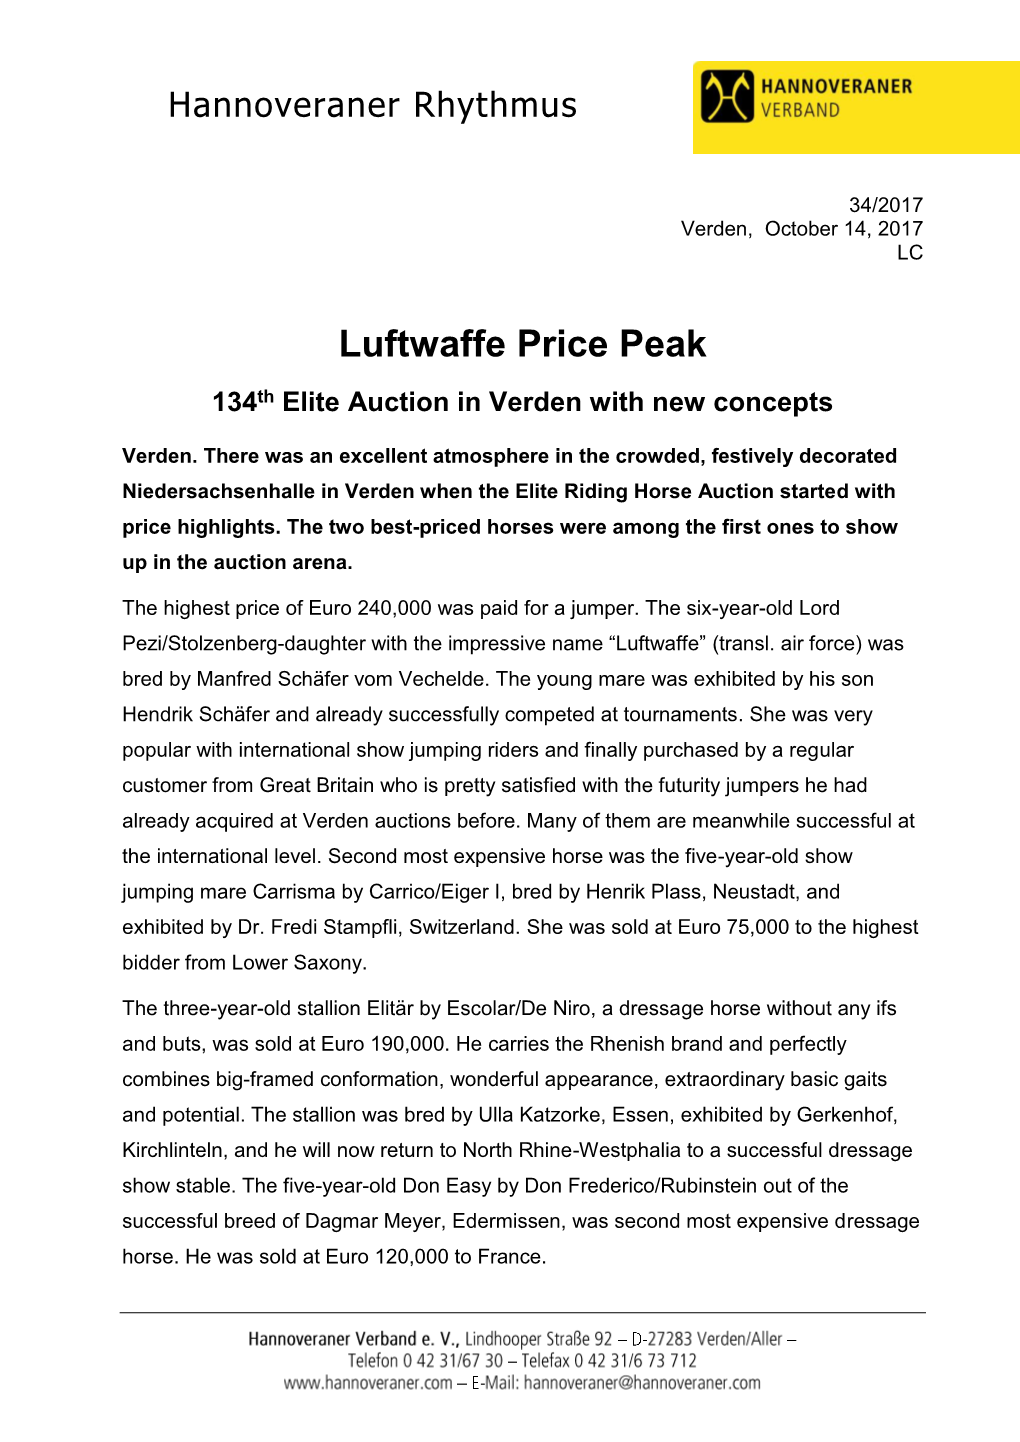 Luftwaffe Price Peak 134Th Elite Auction in Verden with New Concepts